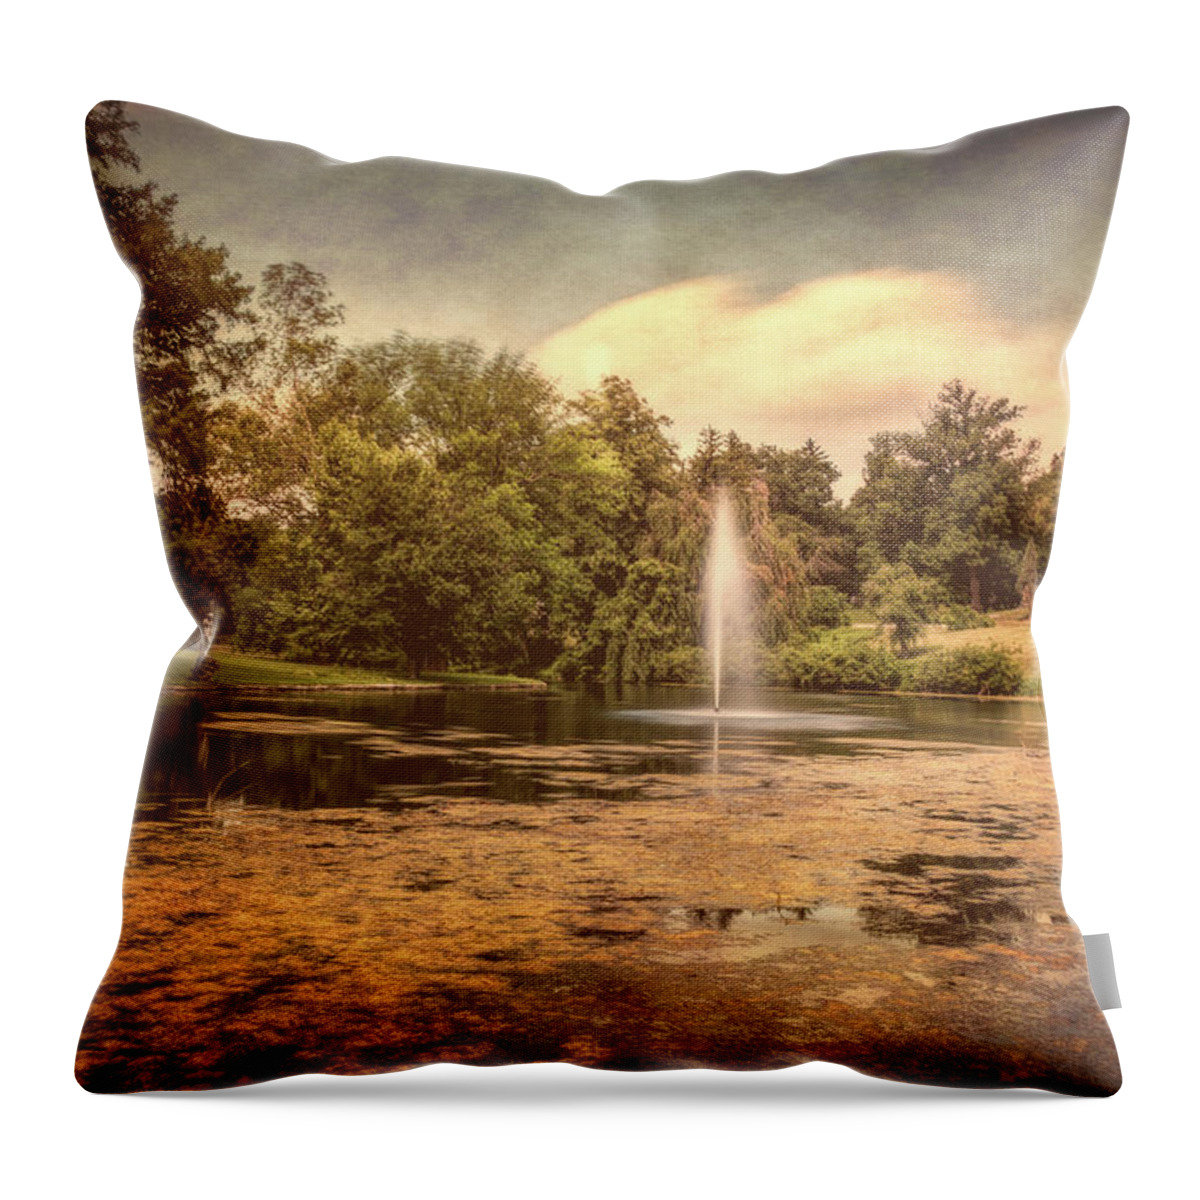 Arboretum Throw Pillow featuring the photograph Spring Grove Water Feature by Tom Mc Nemar